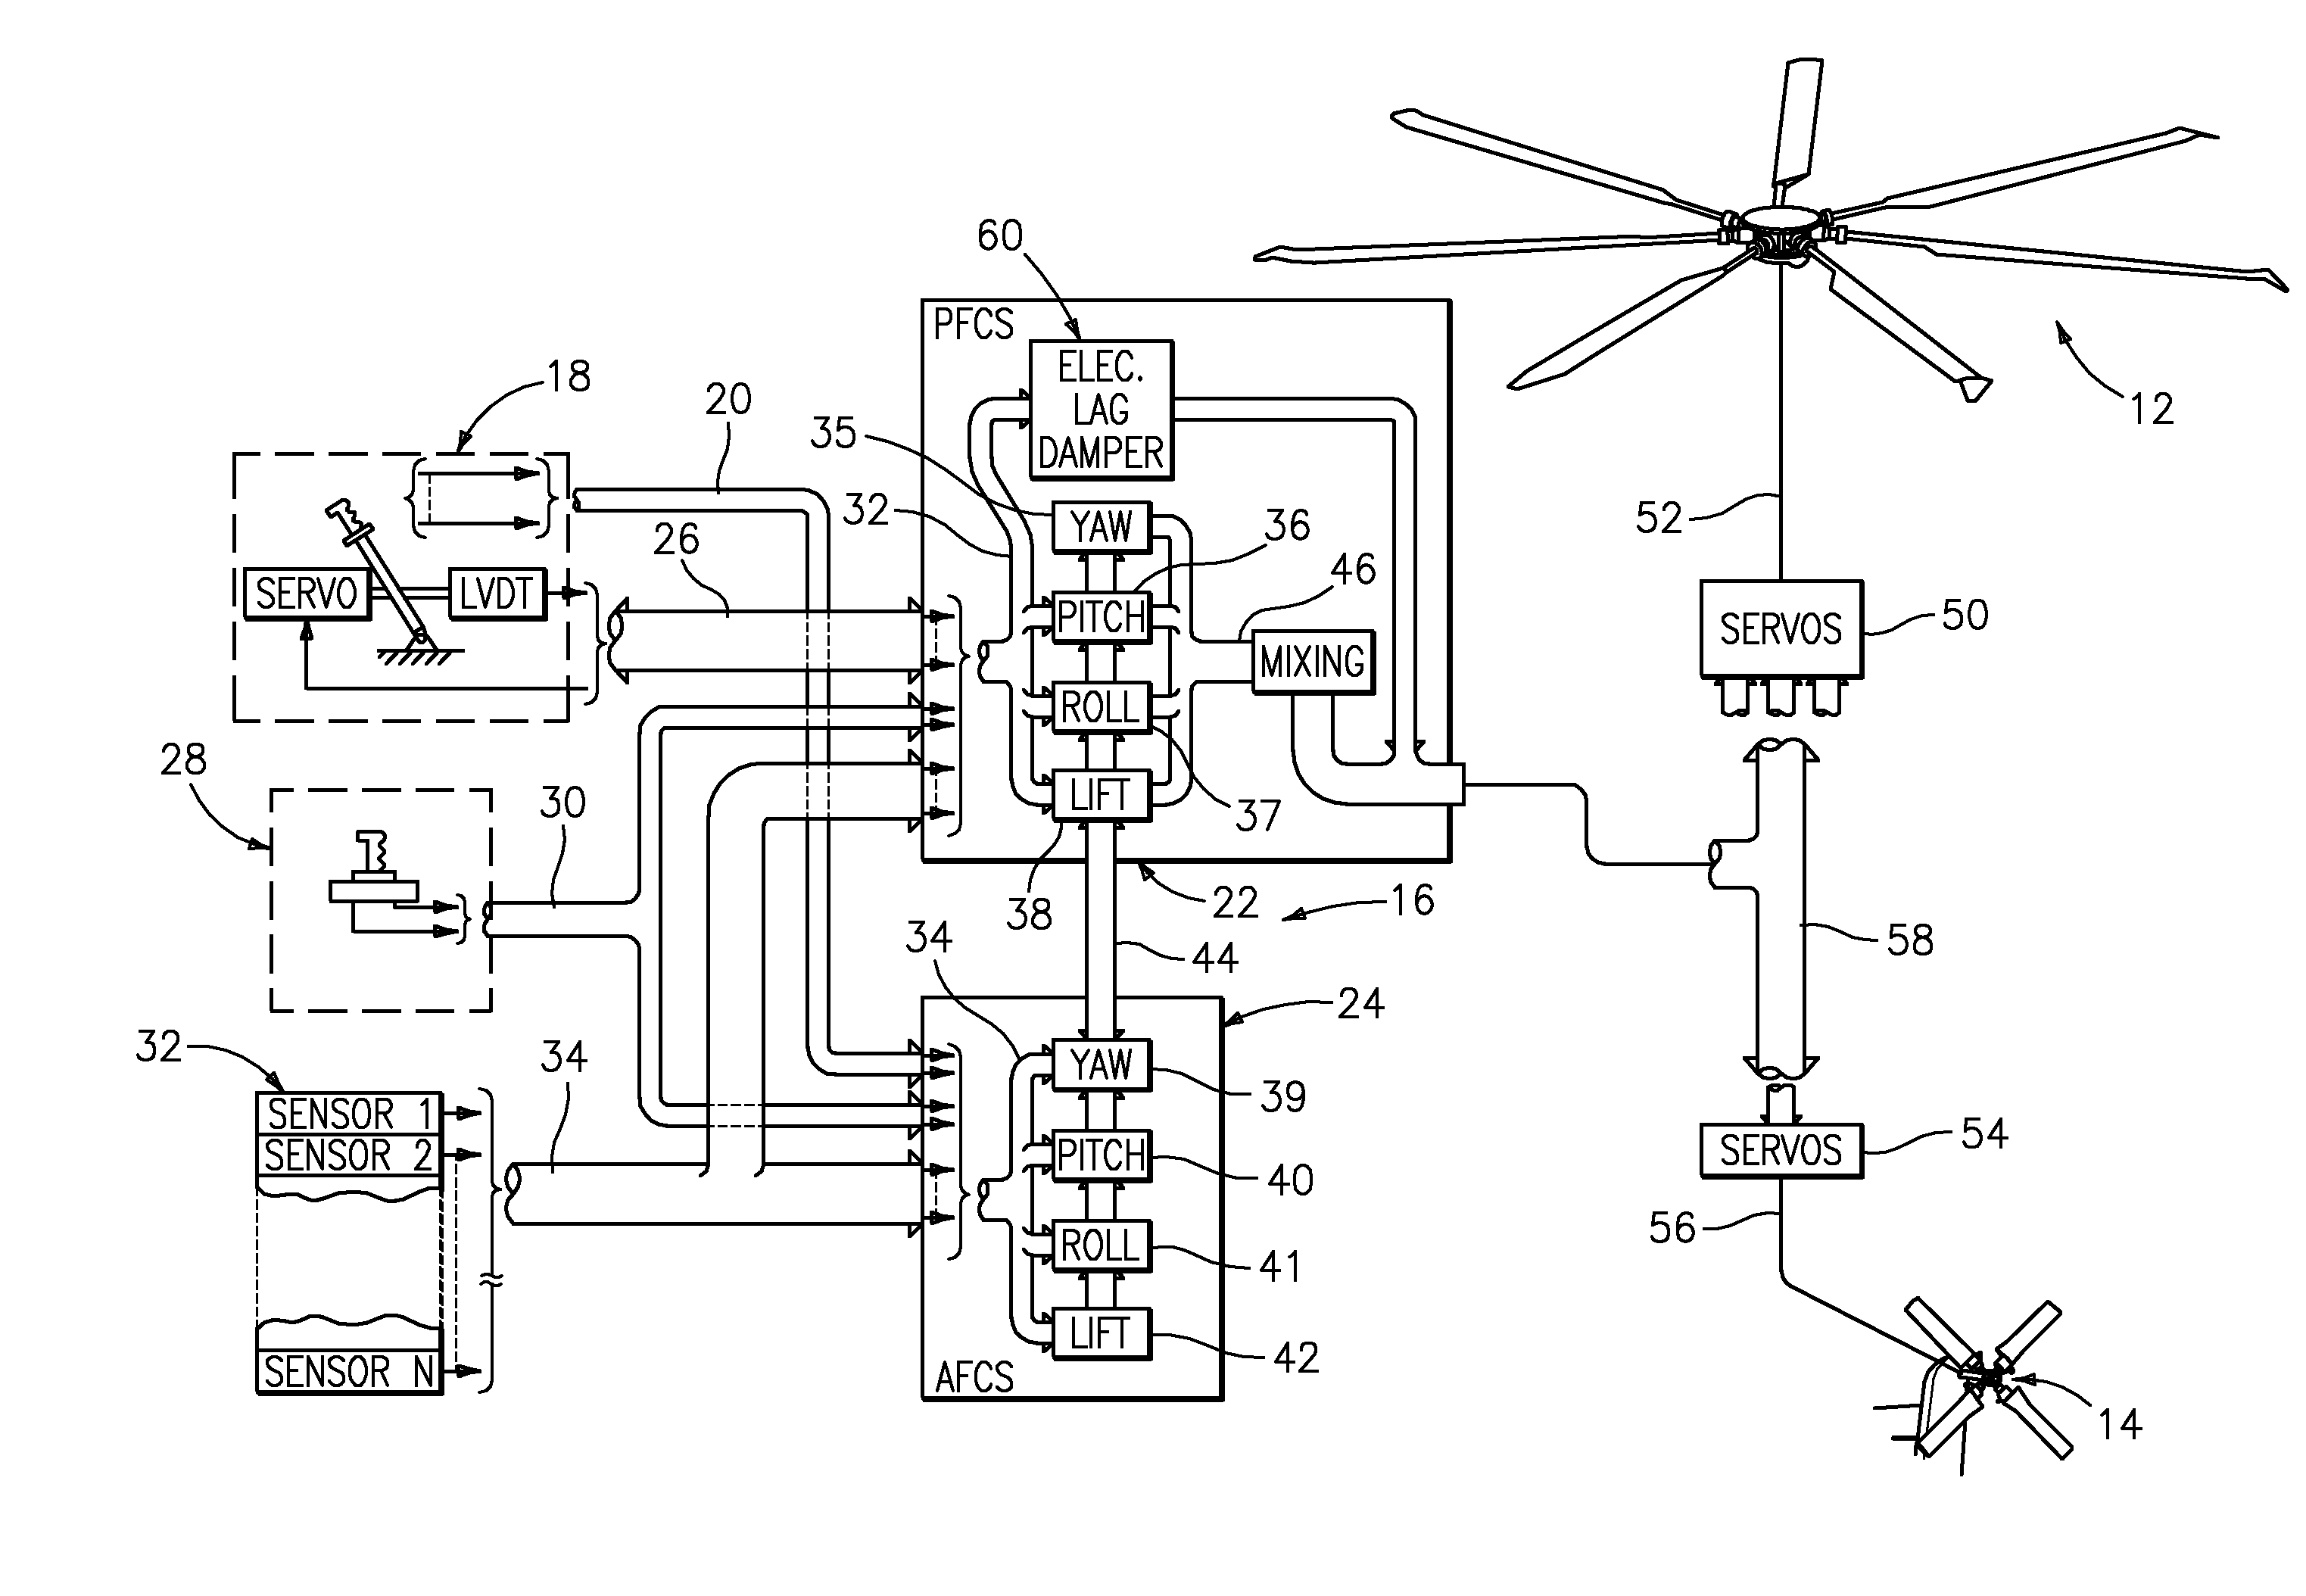 Fly-by-wire flight control system with electronic lead/lag damper algorithm